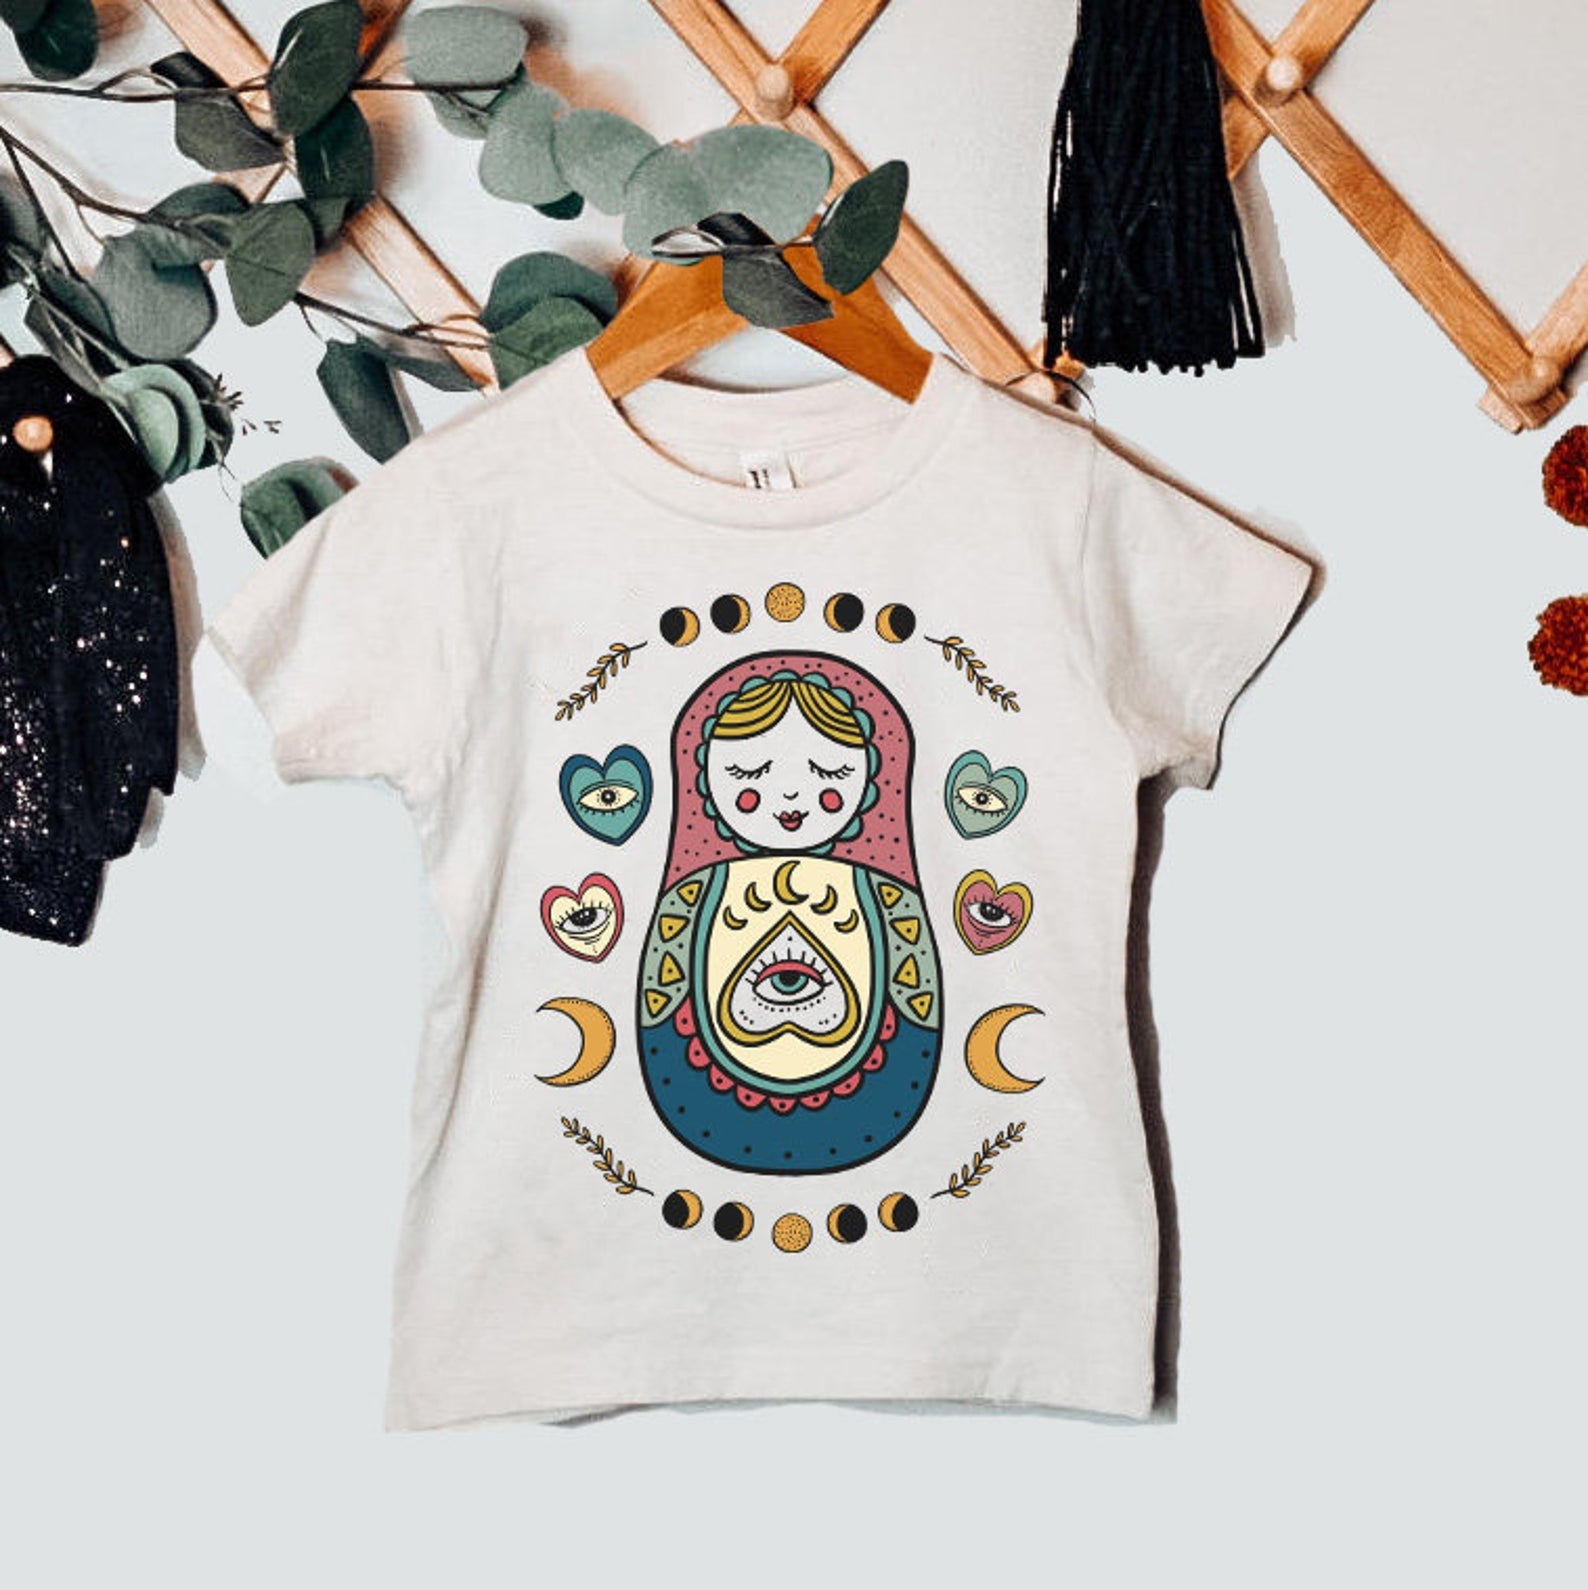 « NESTING DOLL WITH MOON PHASES » KID'S TEE